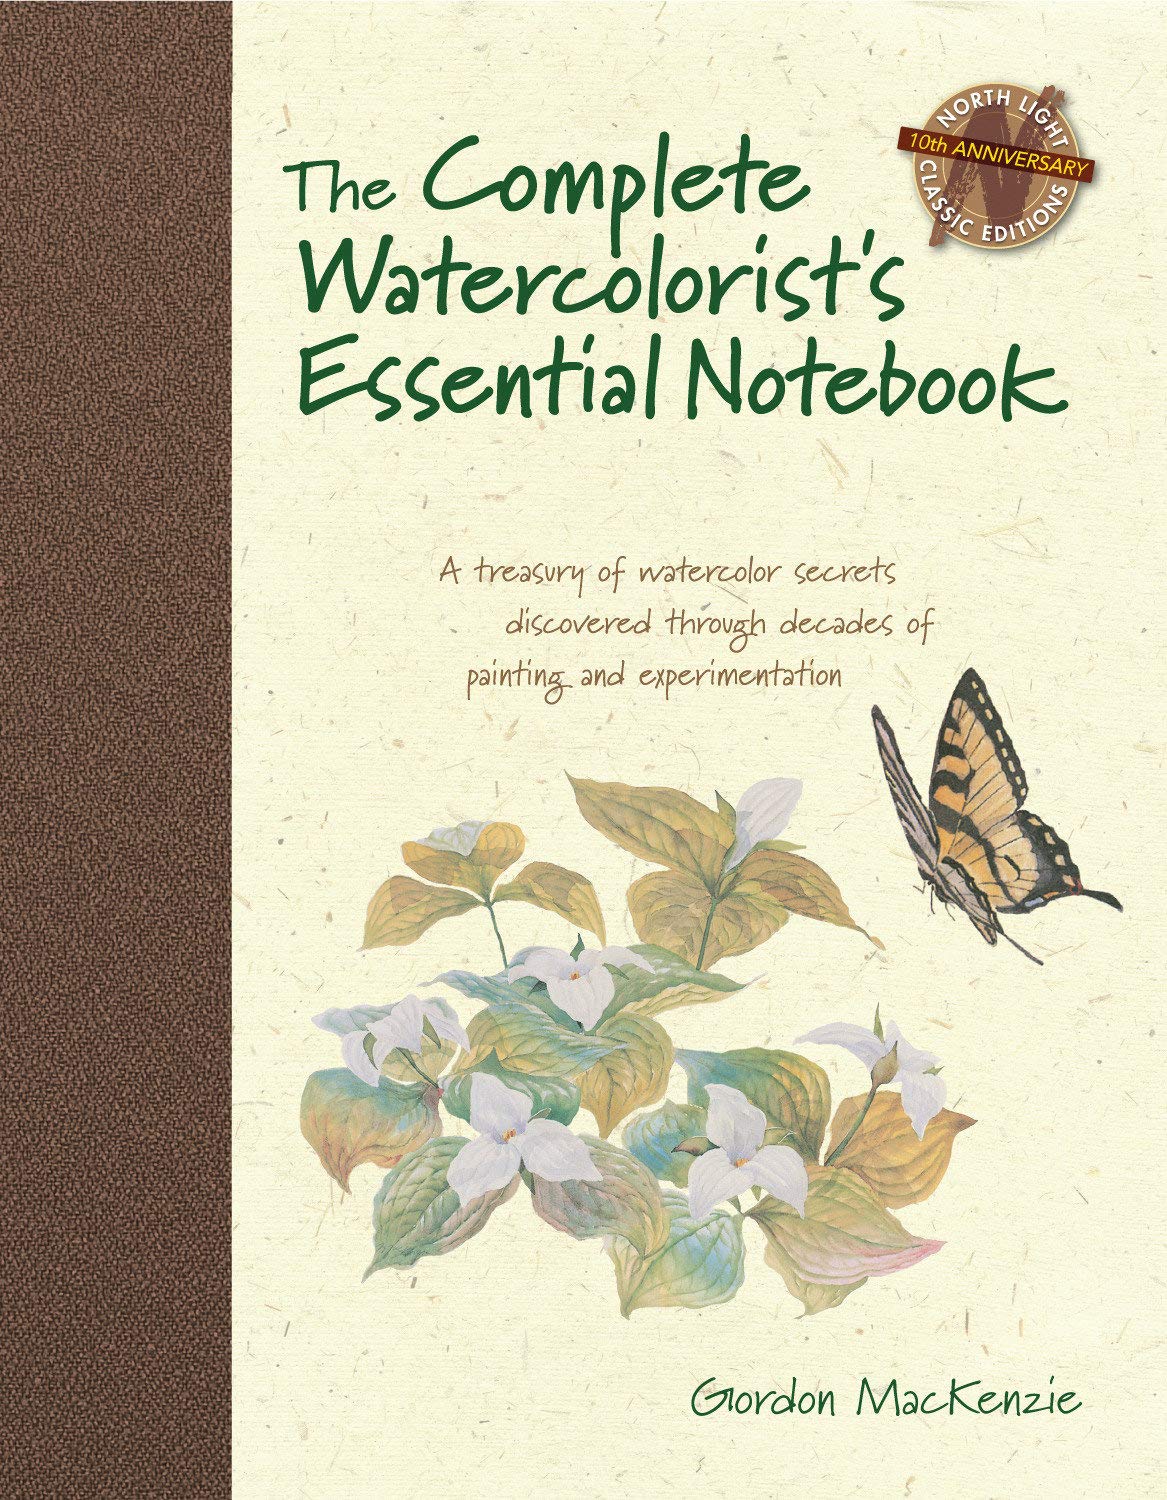 The Complete Watercolorist's Essential Notebook: A Treasury of Watercolor Secrets Discovered Through Decades of Painting and Experimentation